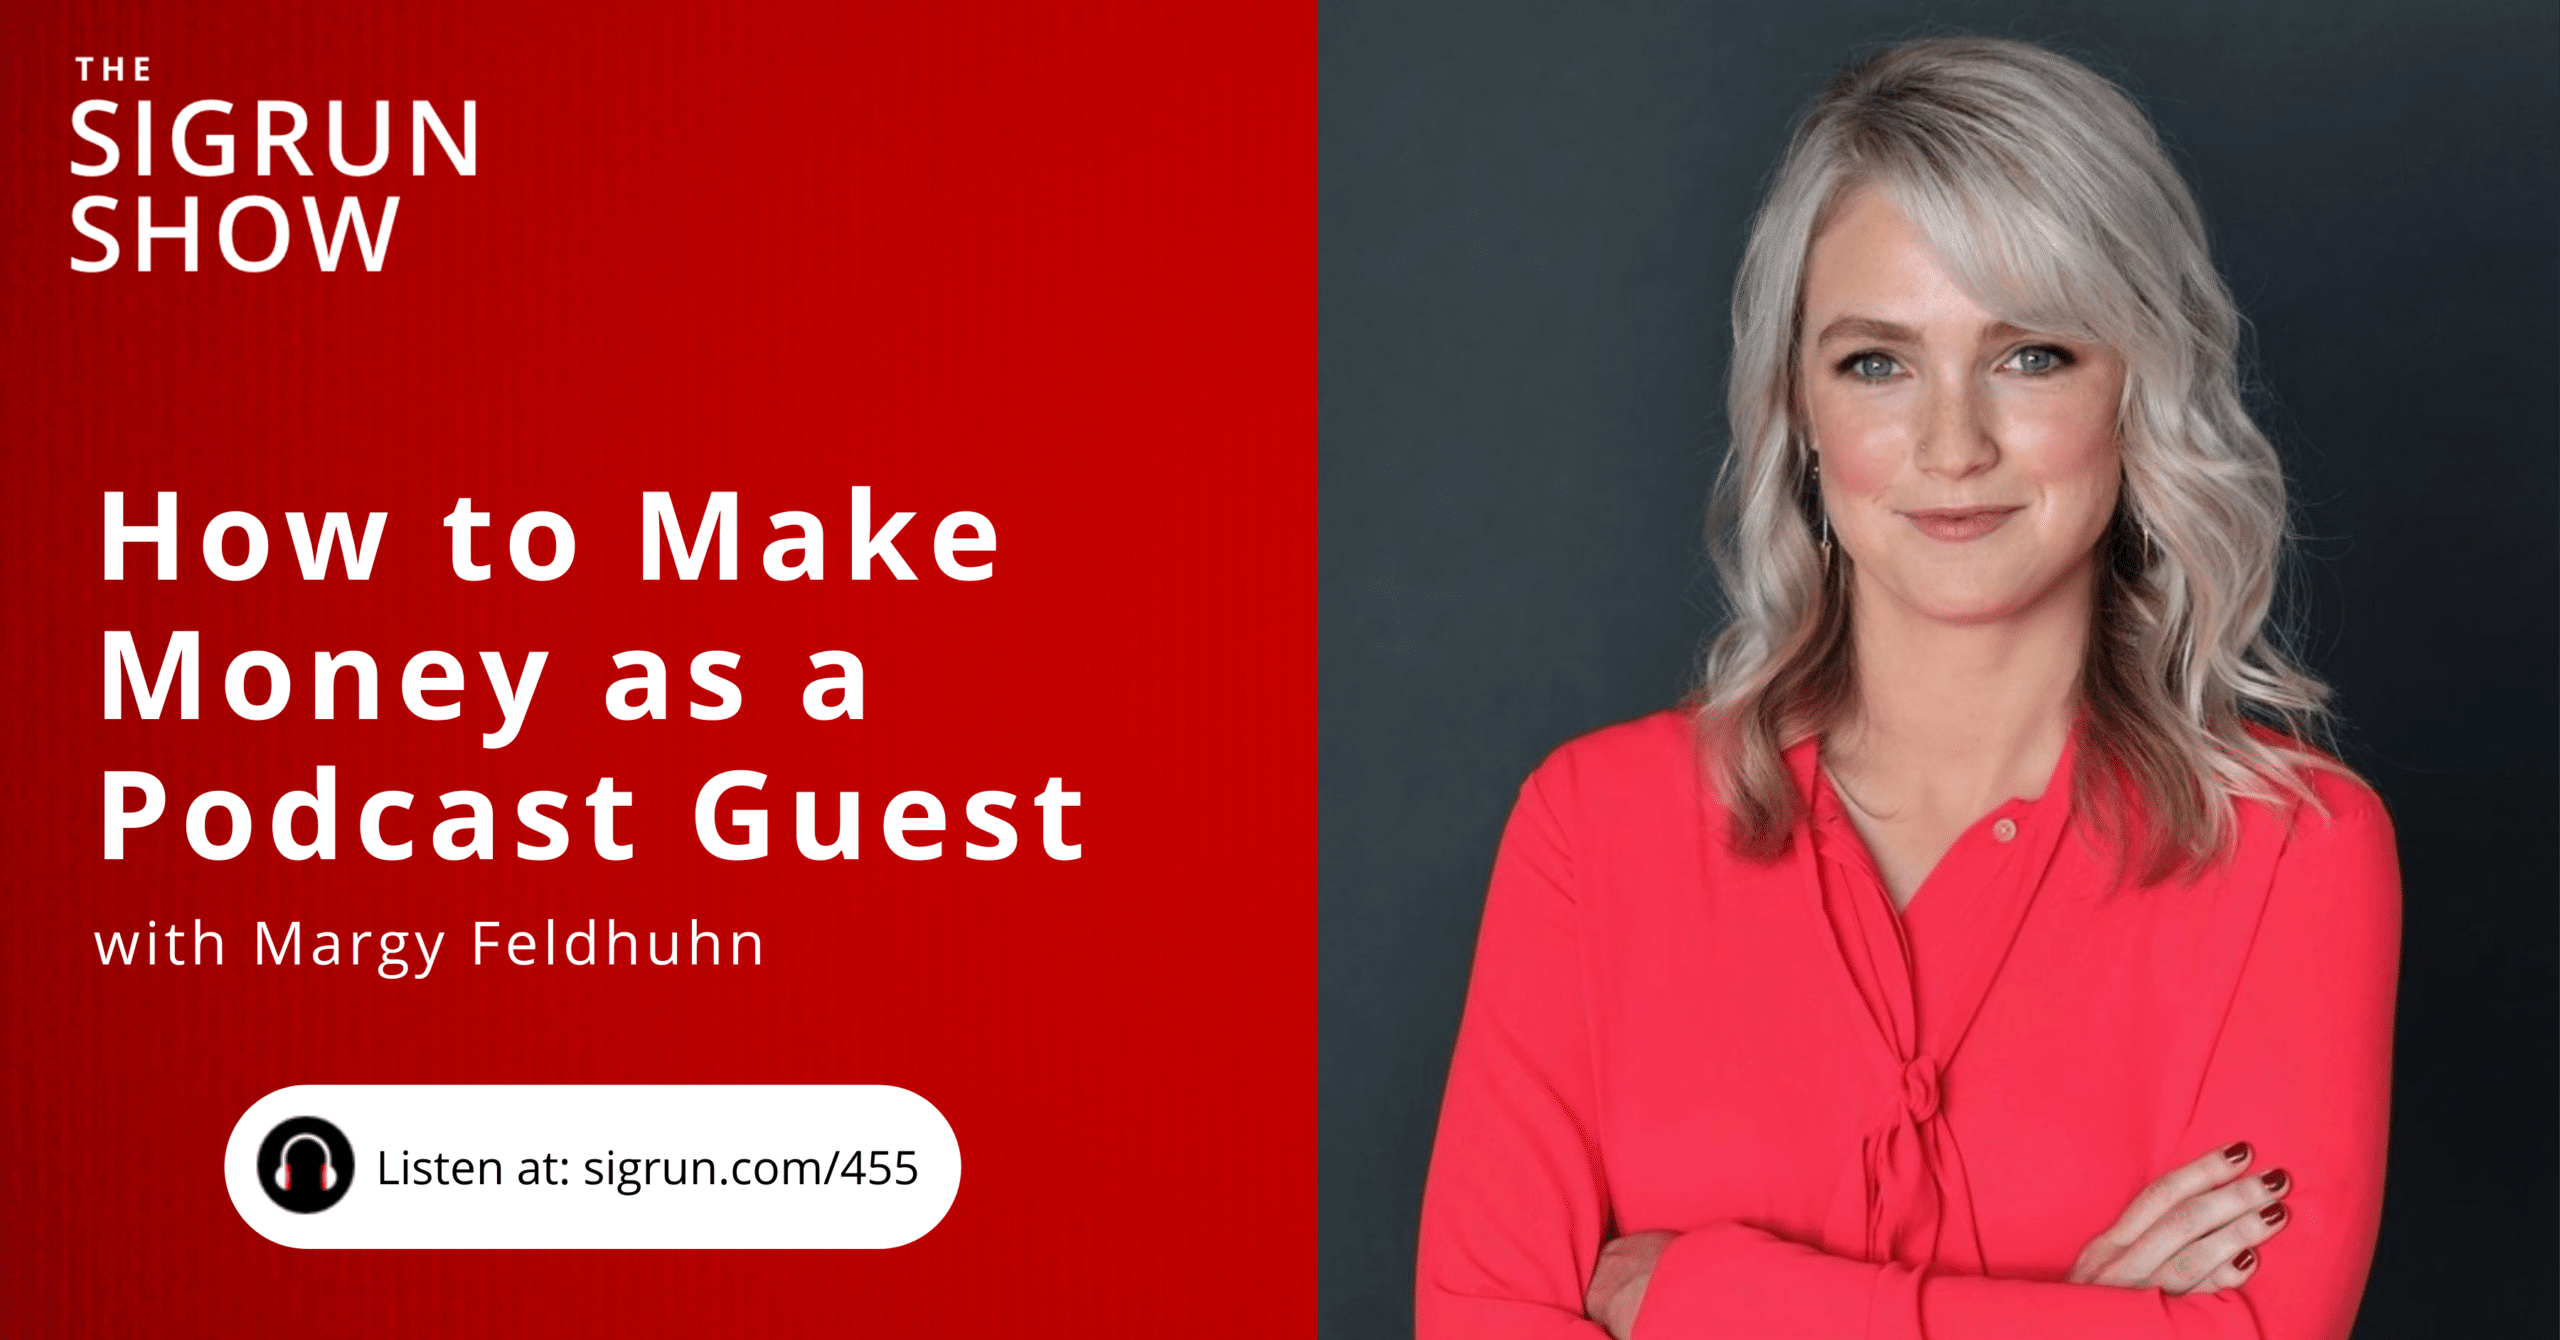 How to Make Money as a Podcast Guest with Margy Feldhuhn